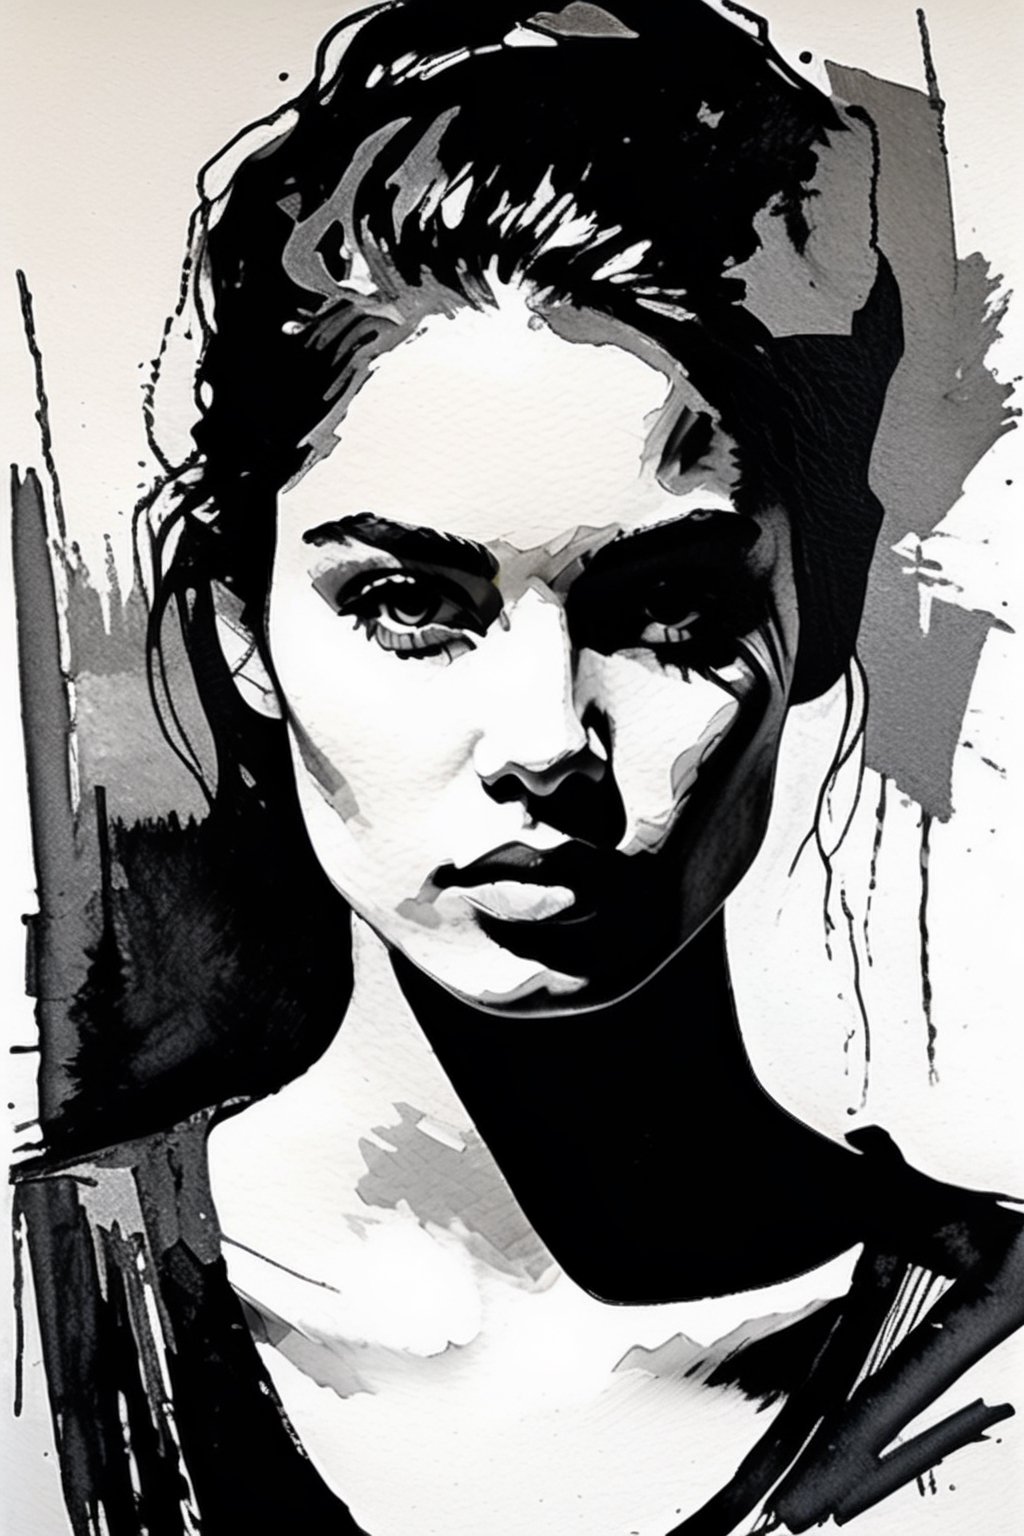 a drawing of a woman, portrait, lookin at the camera, black and white, hints of oil painting style, hints of watercolor style, brush strokes, negative white space, captivating beauty, crisp, sharp, textured collage, layered fibers, post-impressionist, hyper-realism, 